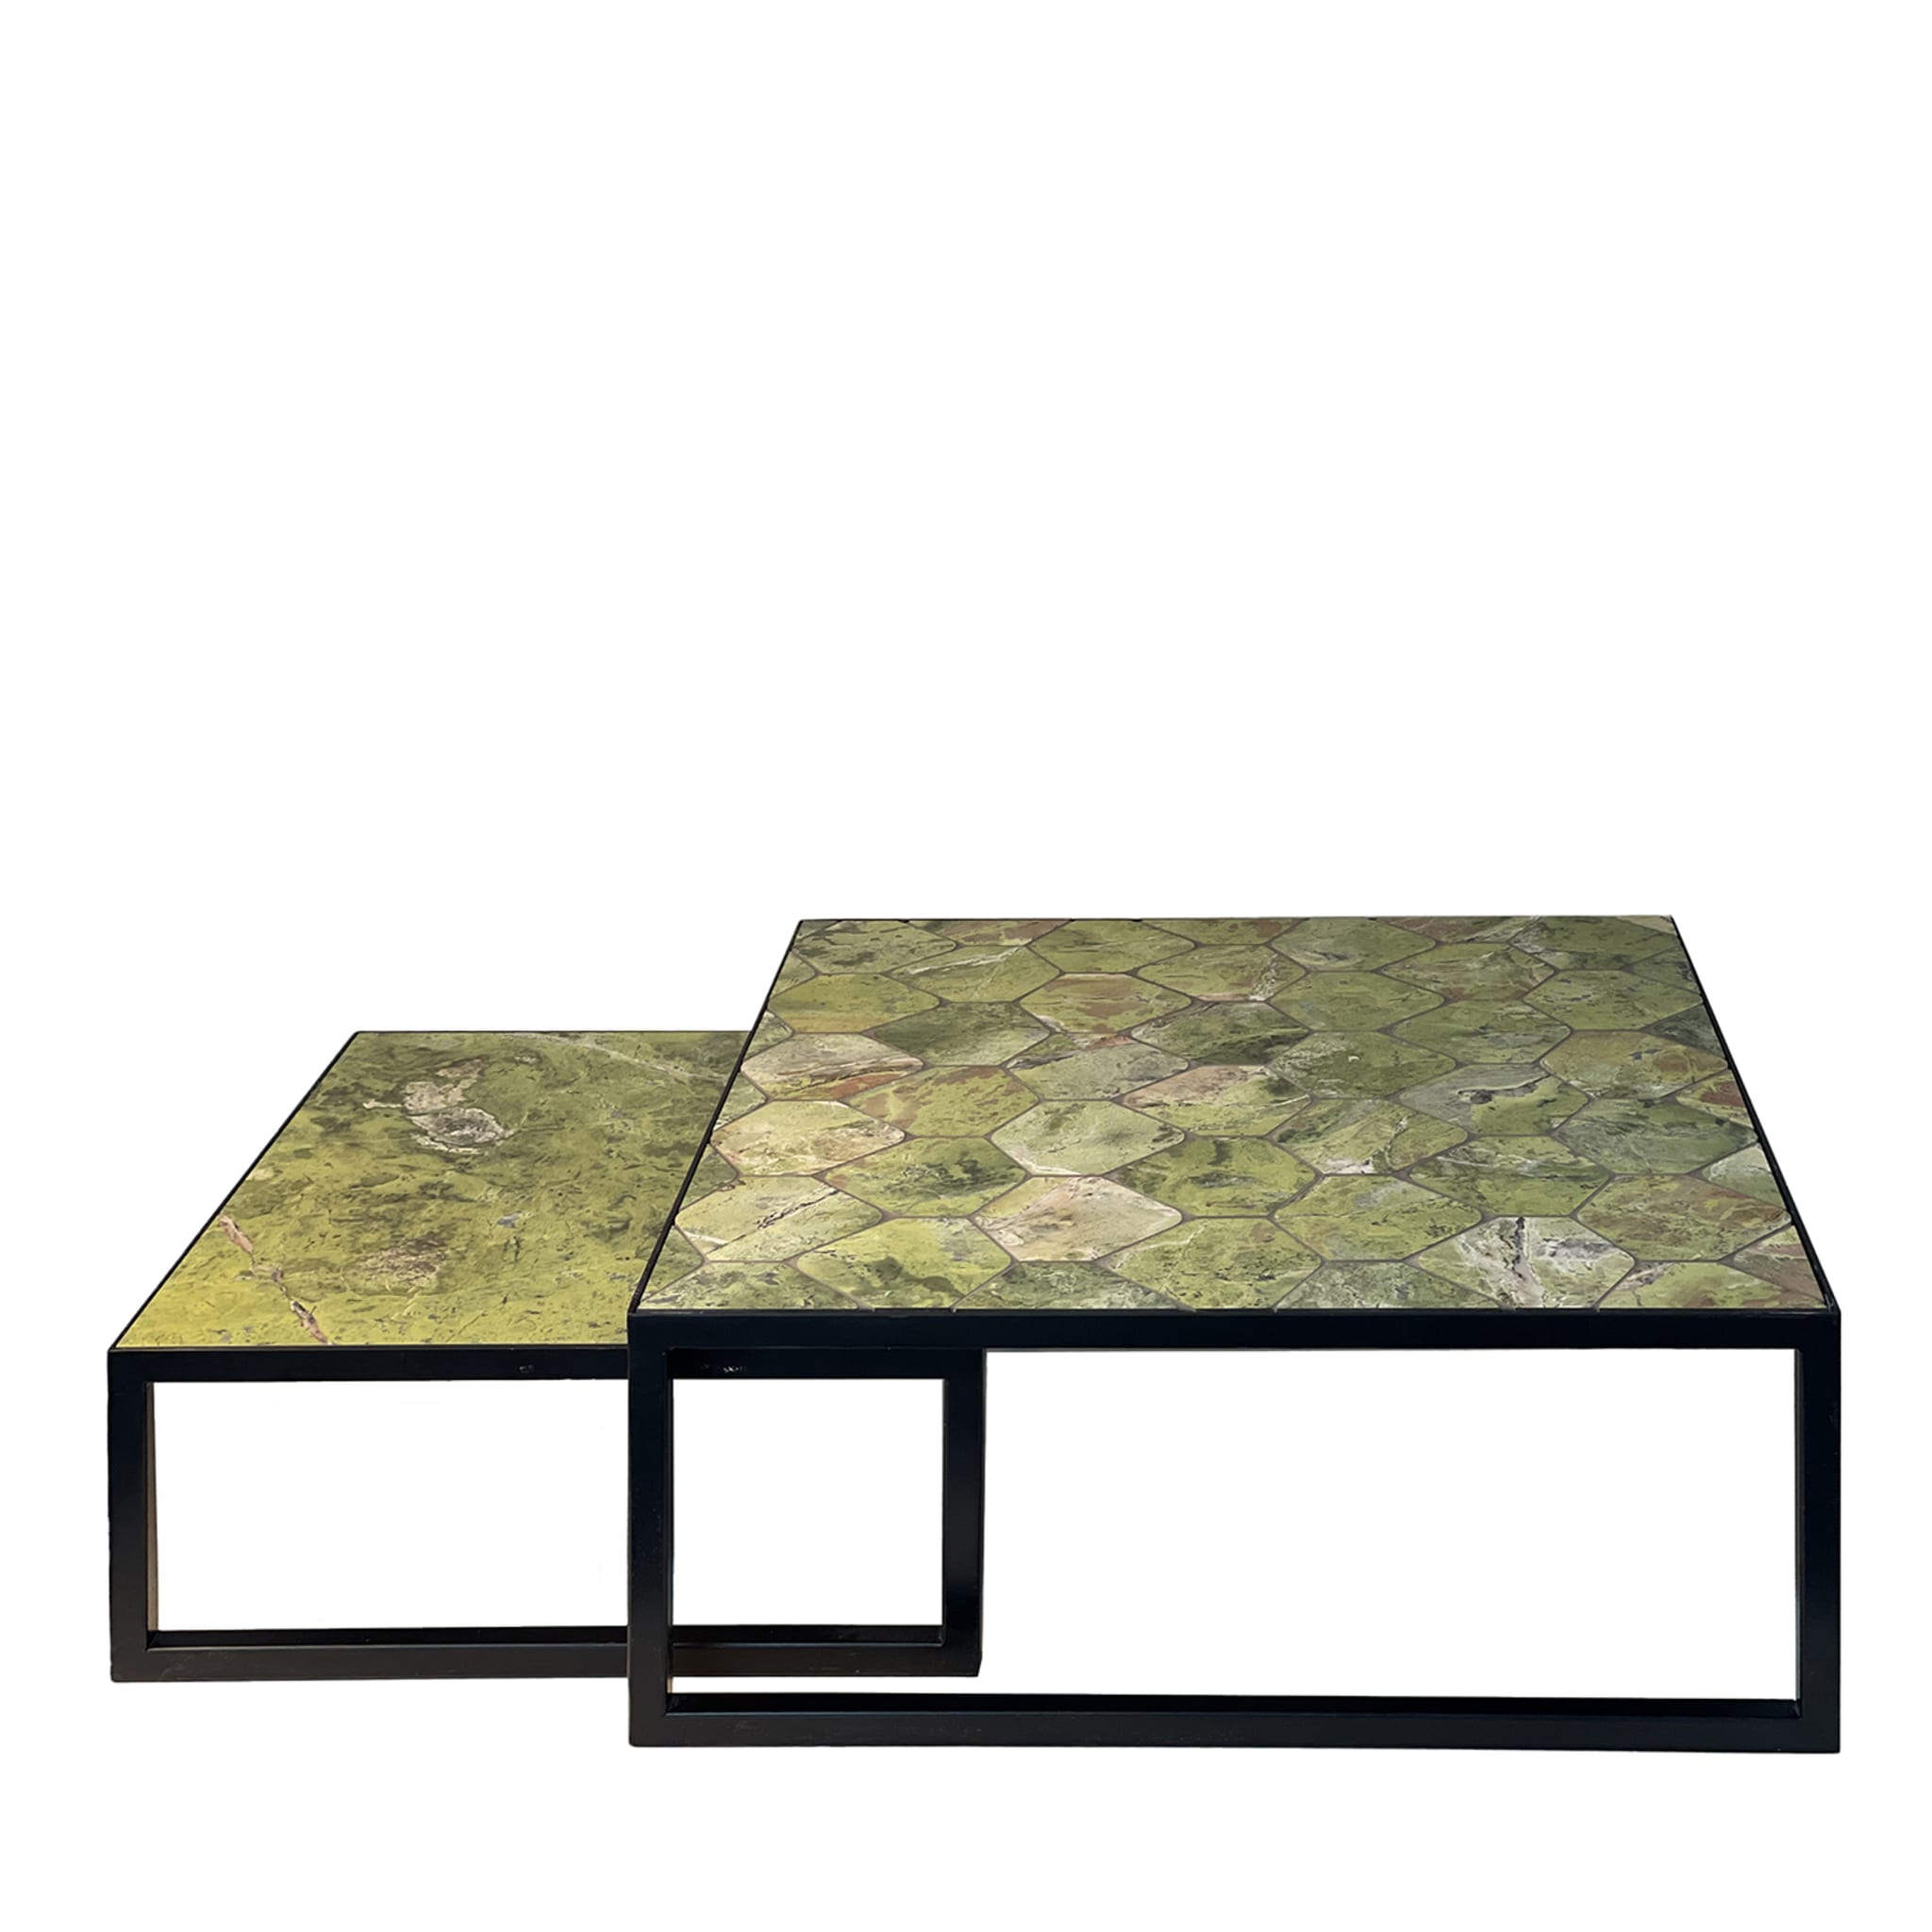 Set of 2 Regolo Coffee Tables #2 - Main view